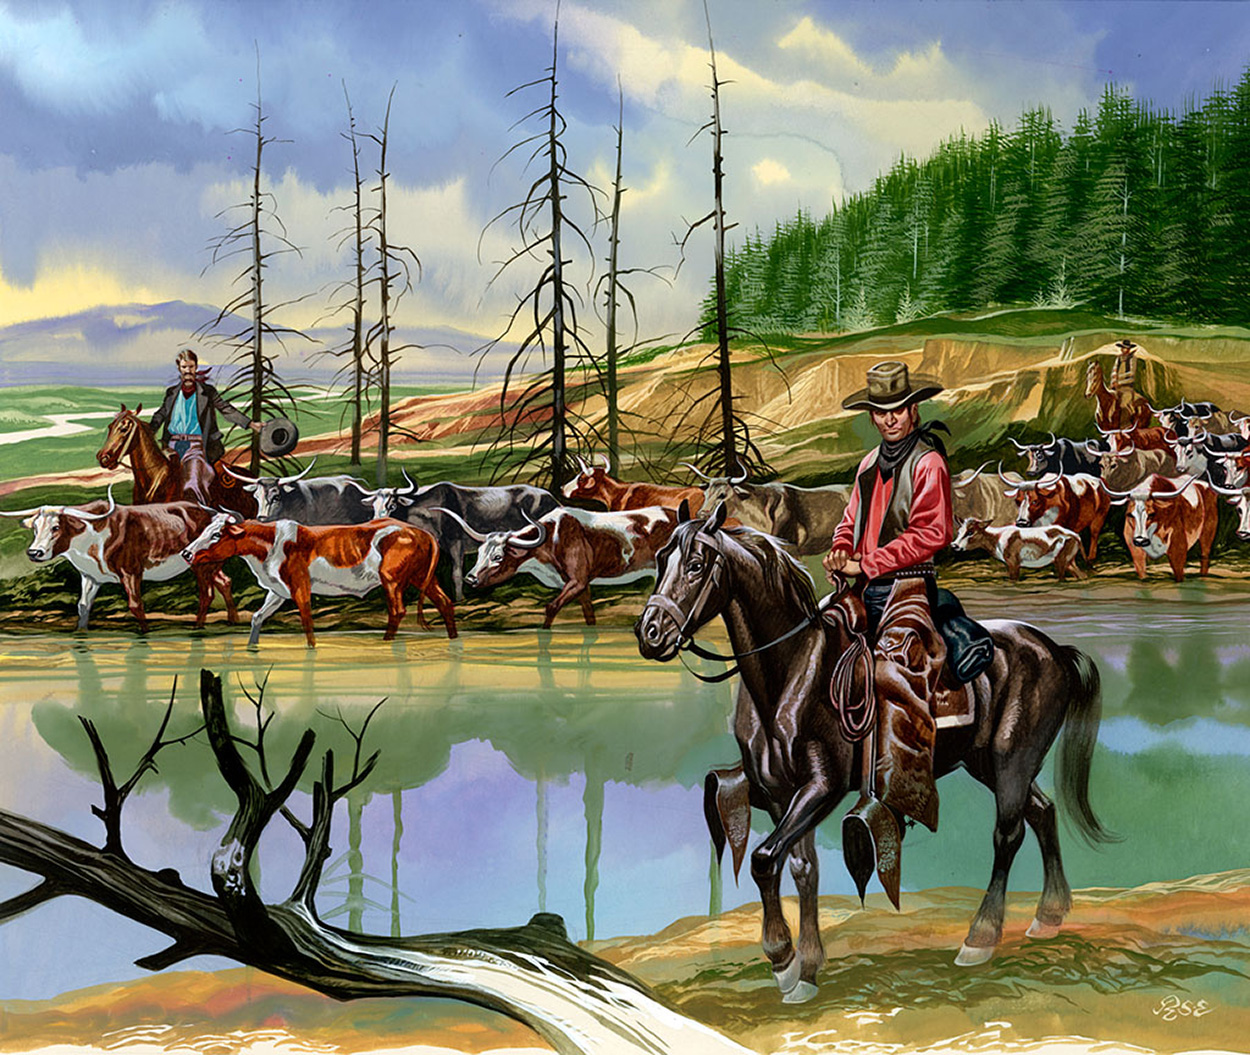 Texan Cowboys Driving Cattle North (Original) (Signed) art by American History (Ron Embleton) at The Illustration Art Gallery